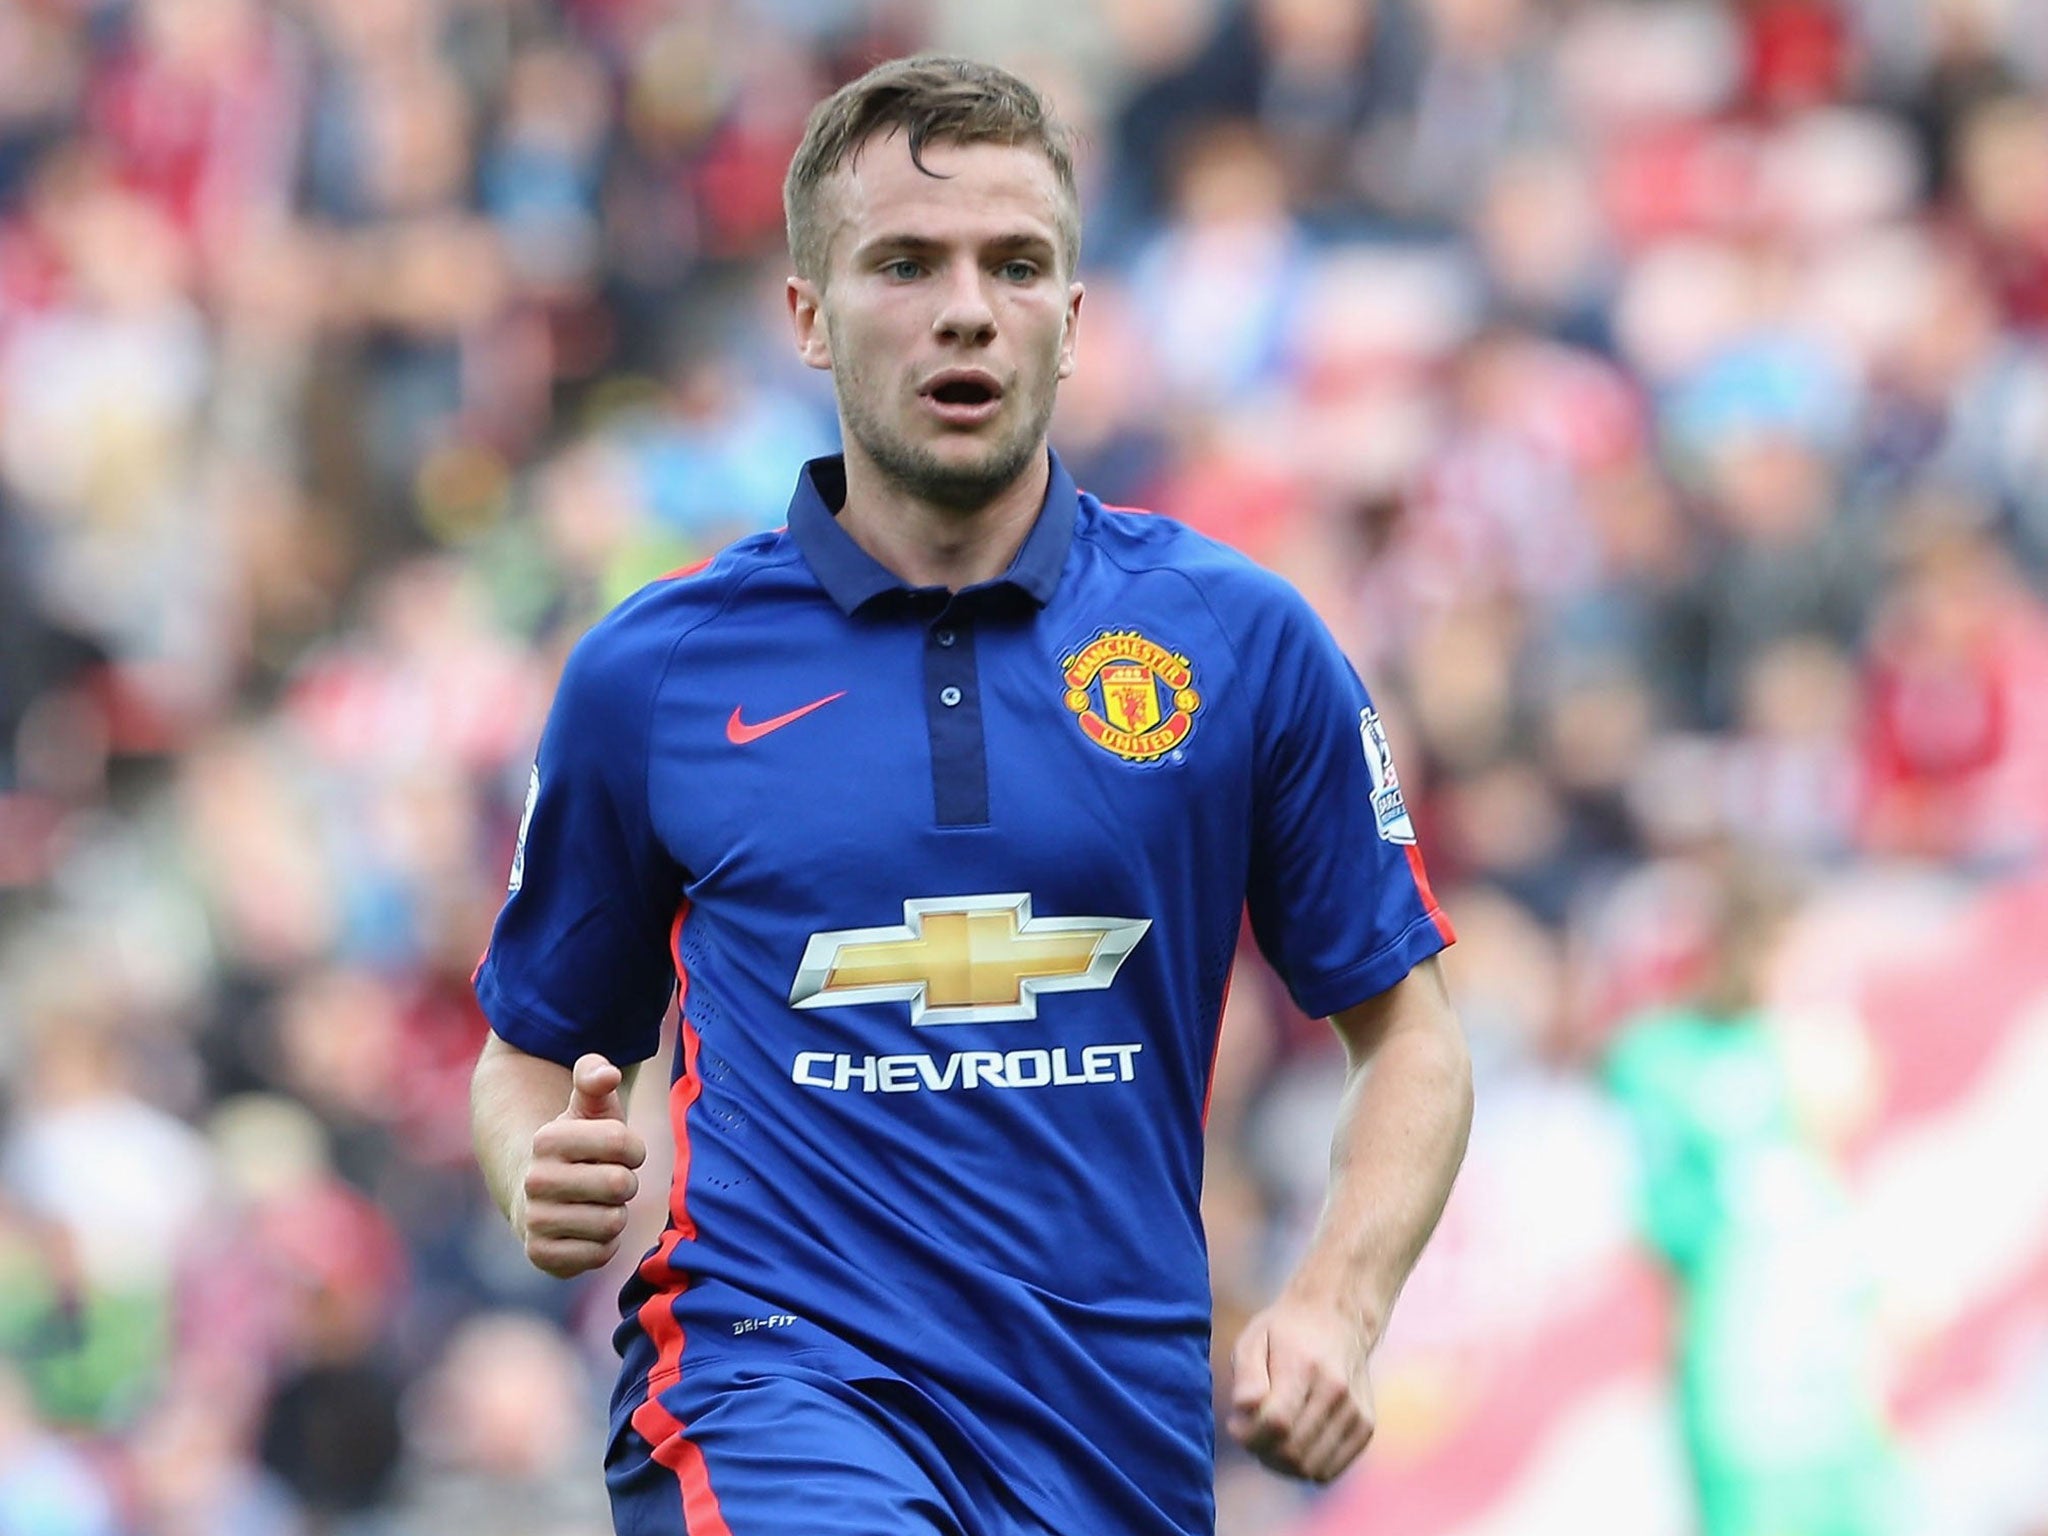 Manchester United midfielder Tom Cleverley is wanted by both Aston Villa and Hull City